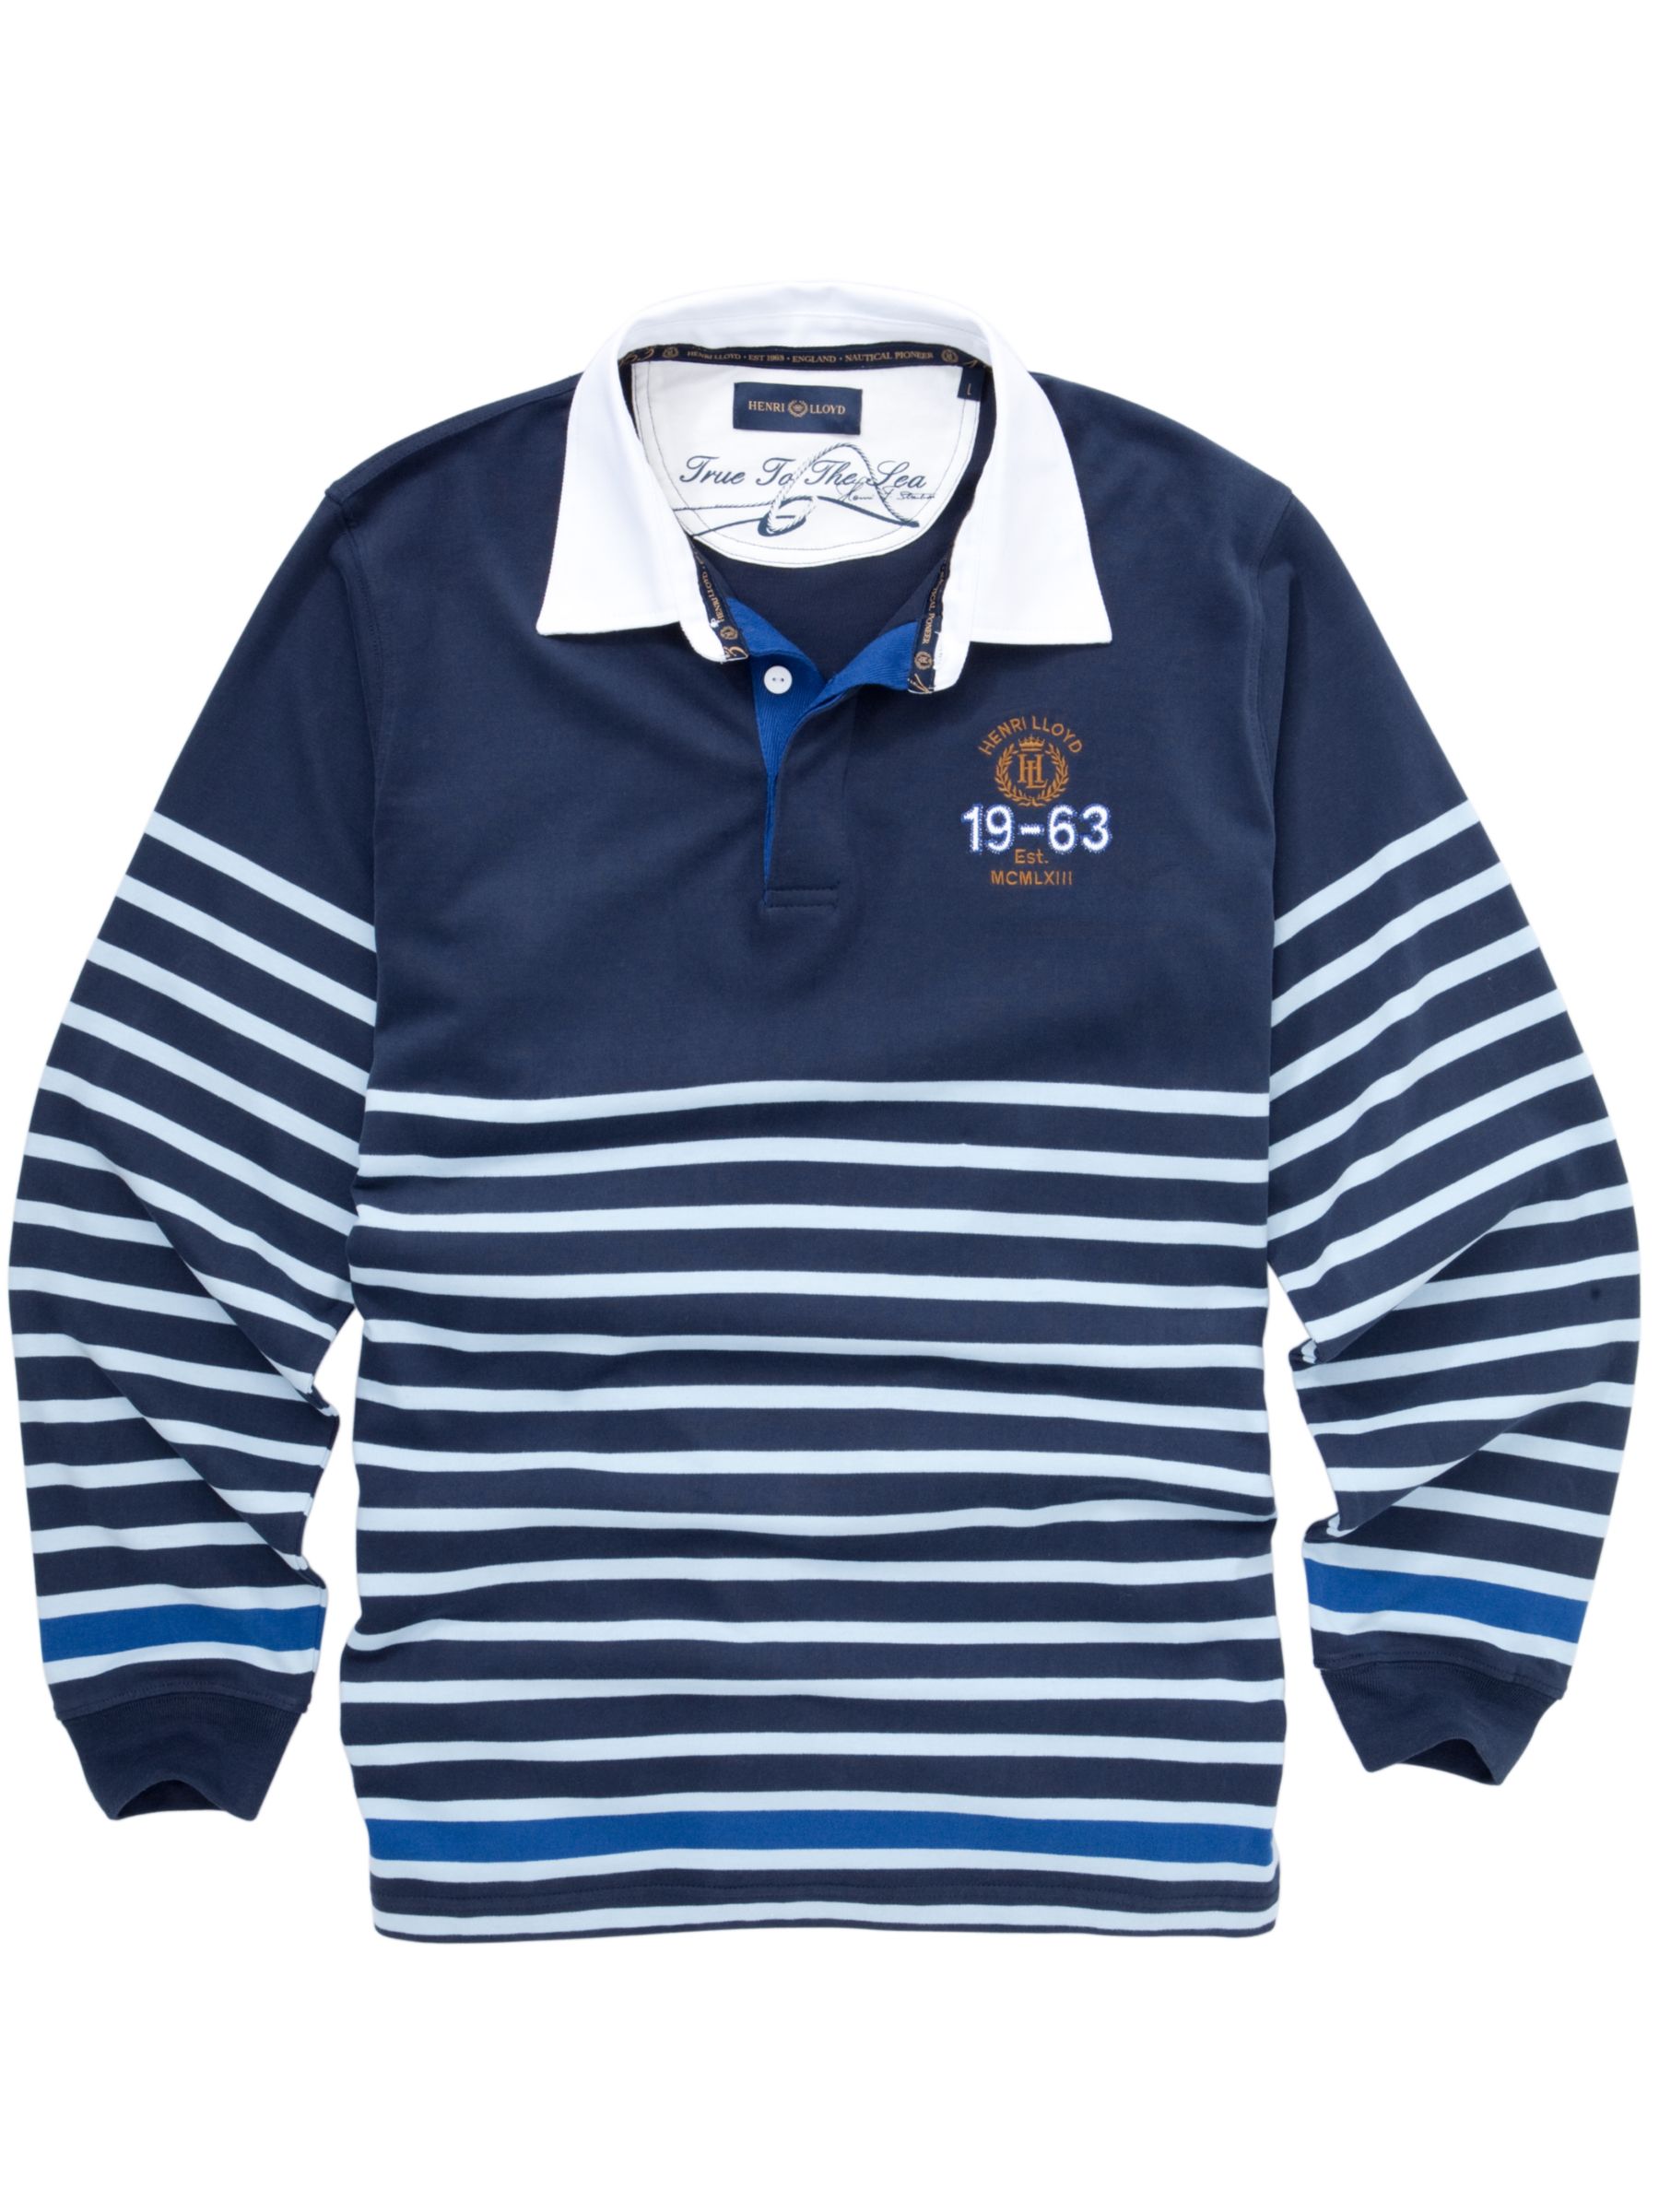 Cranwell Stripe Rugby Shirt, Pacific